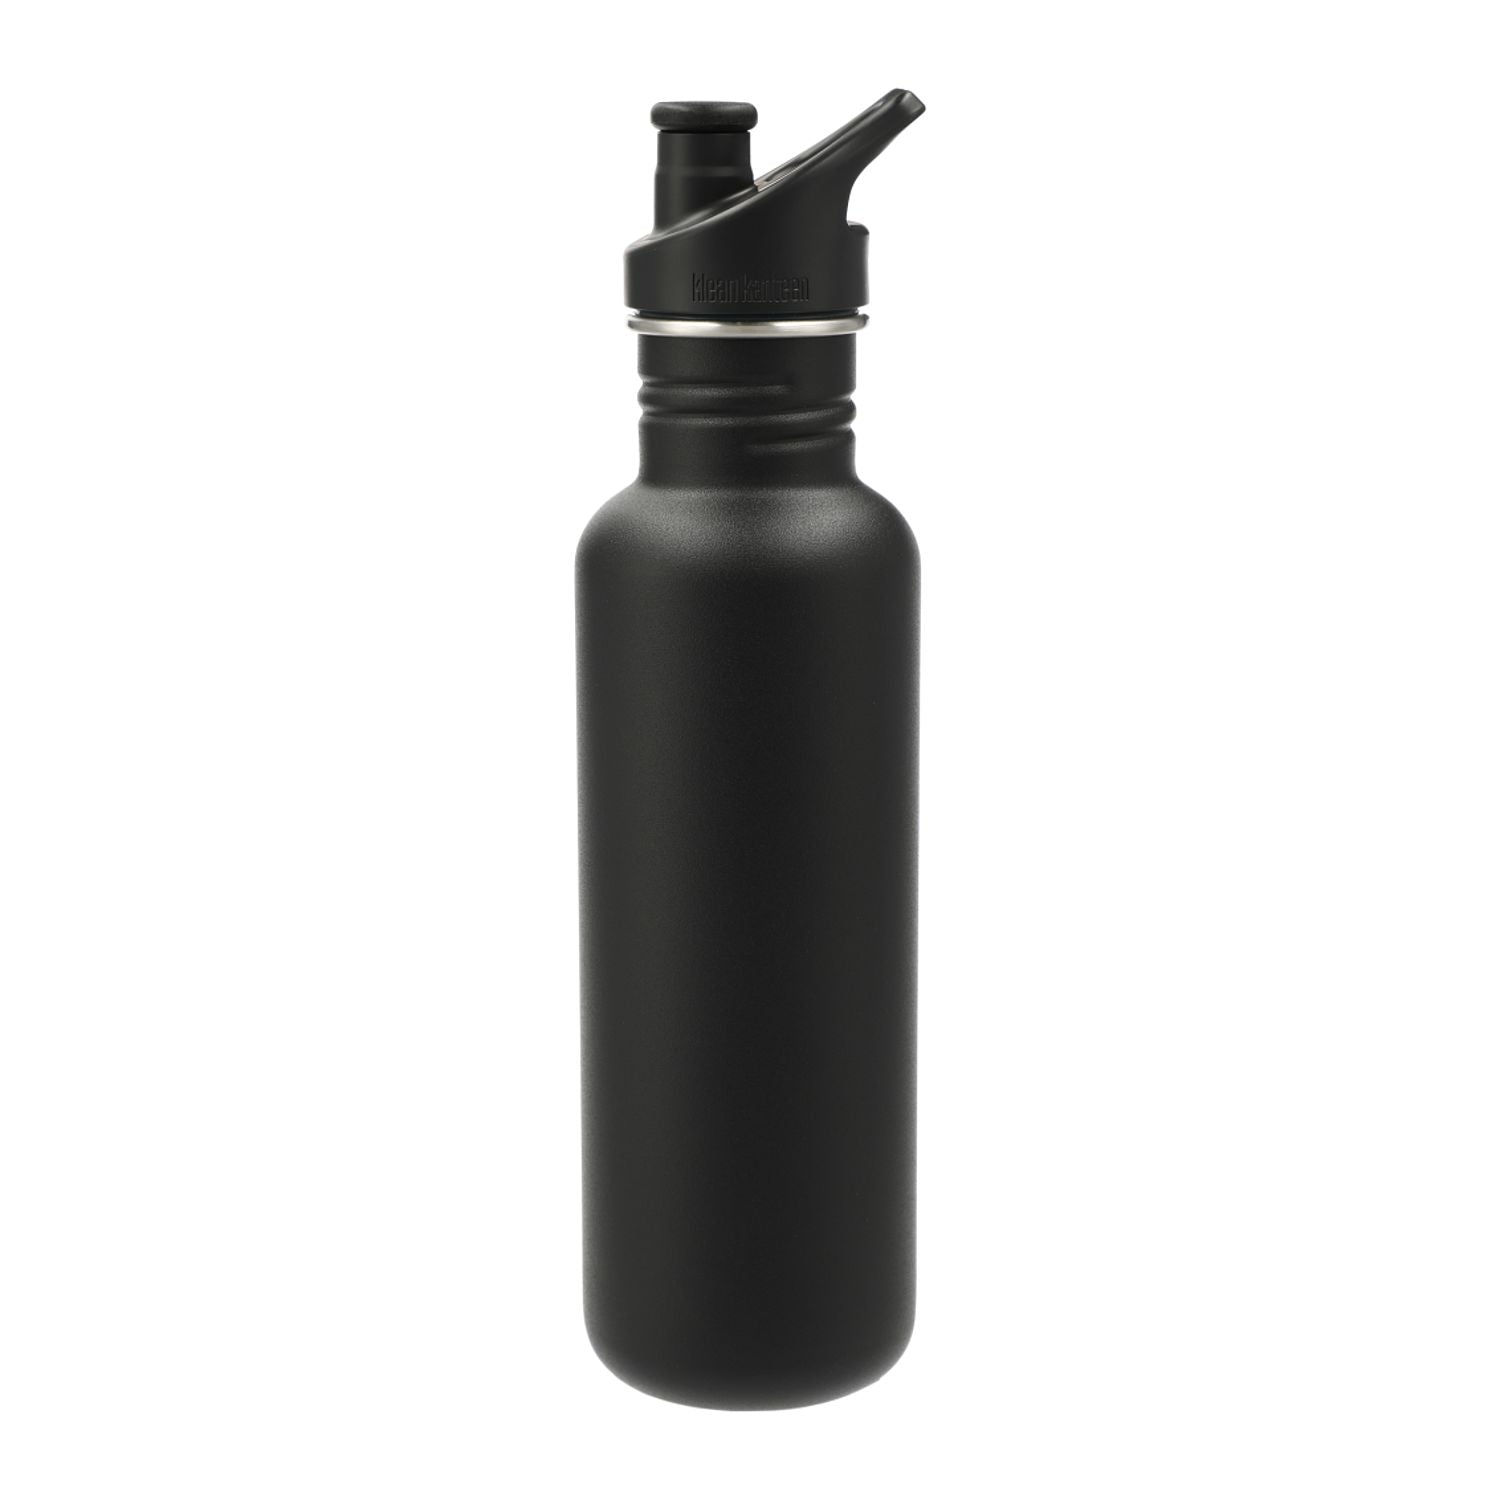 Klean Kanteen 27 oz Eco Classic Single-Walled With Sport Cap in black.